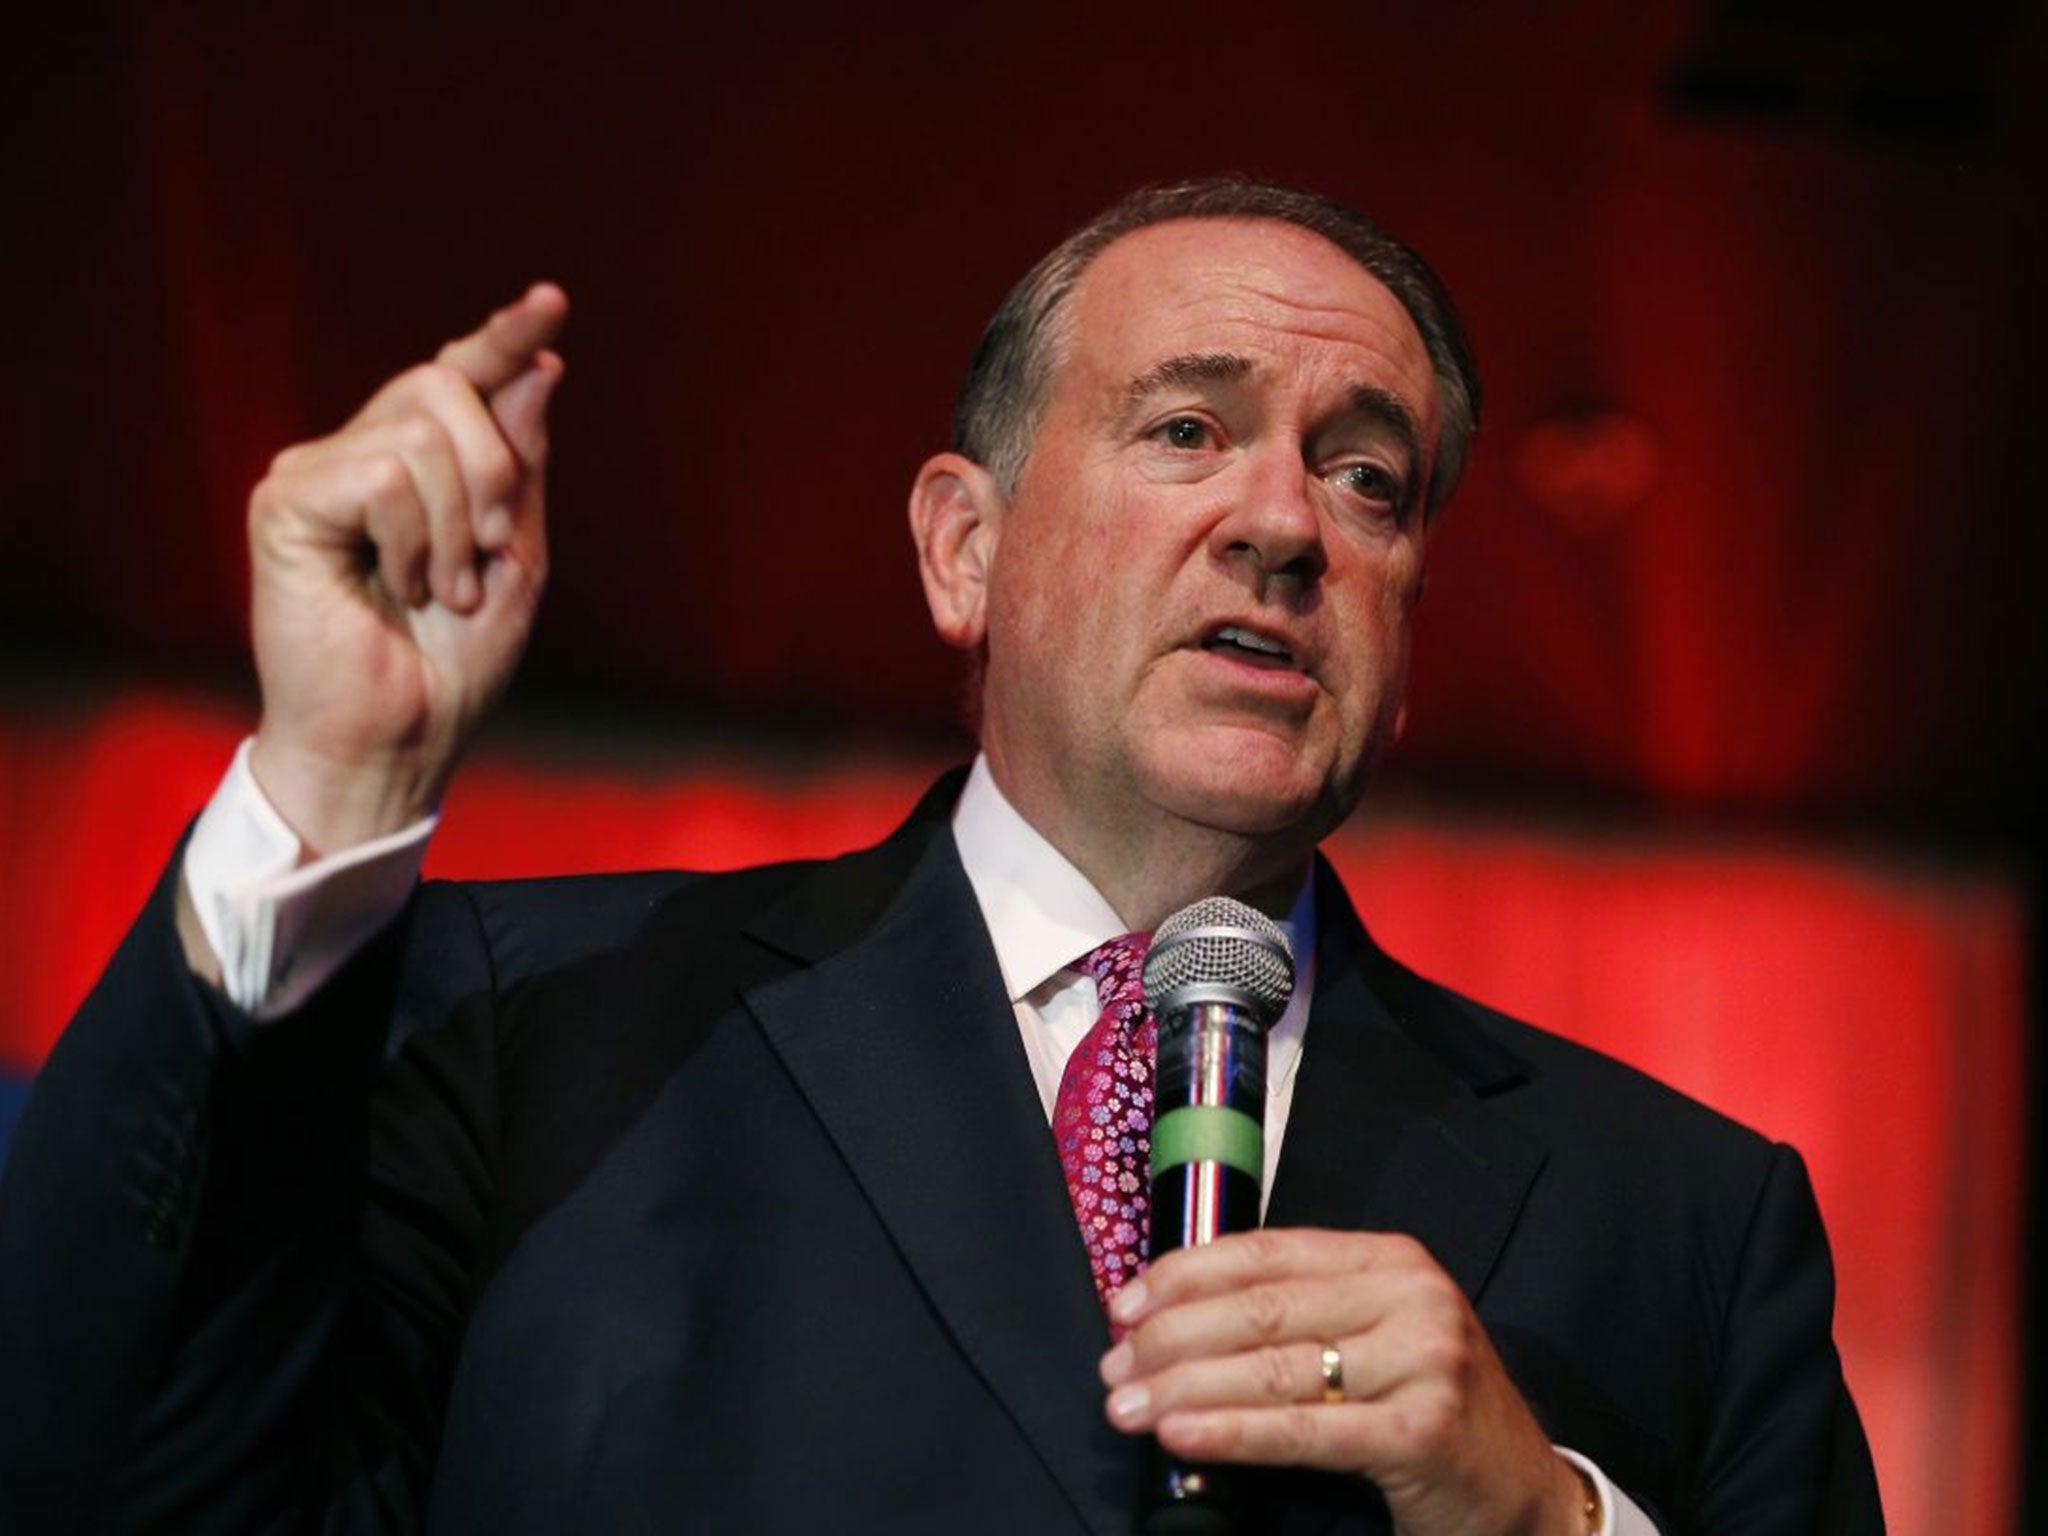 Mike Huckabee is bucking fellow conservatives to defend the National Endowment of the Arts